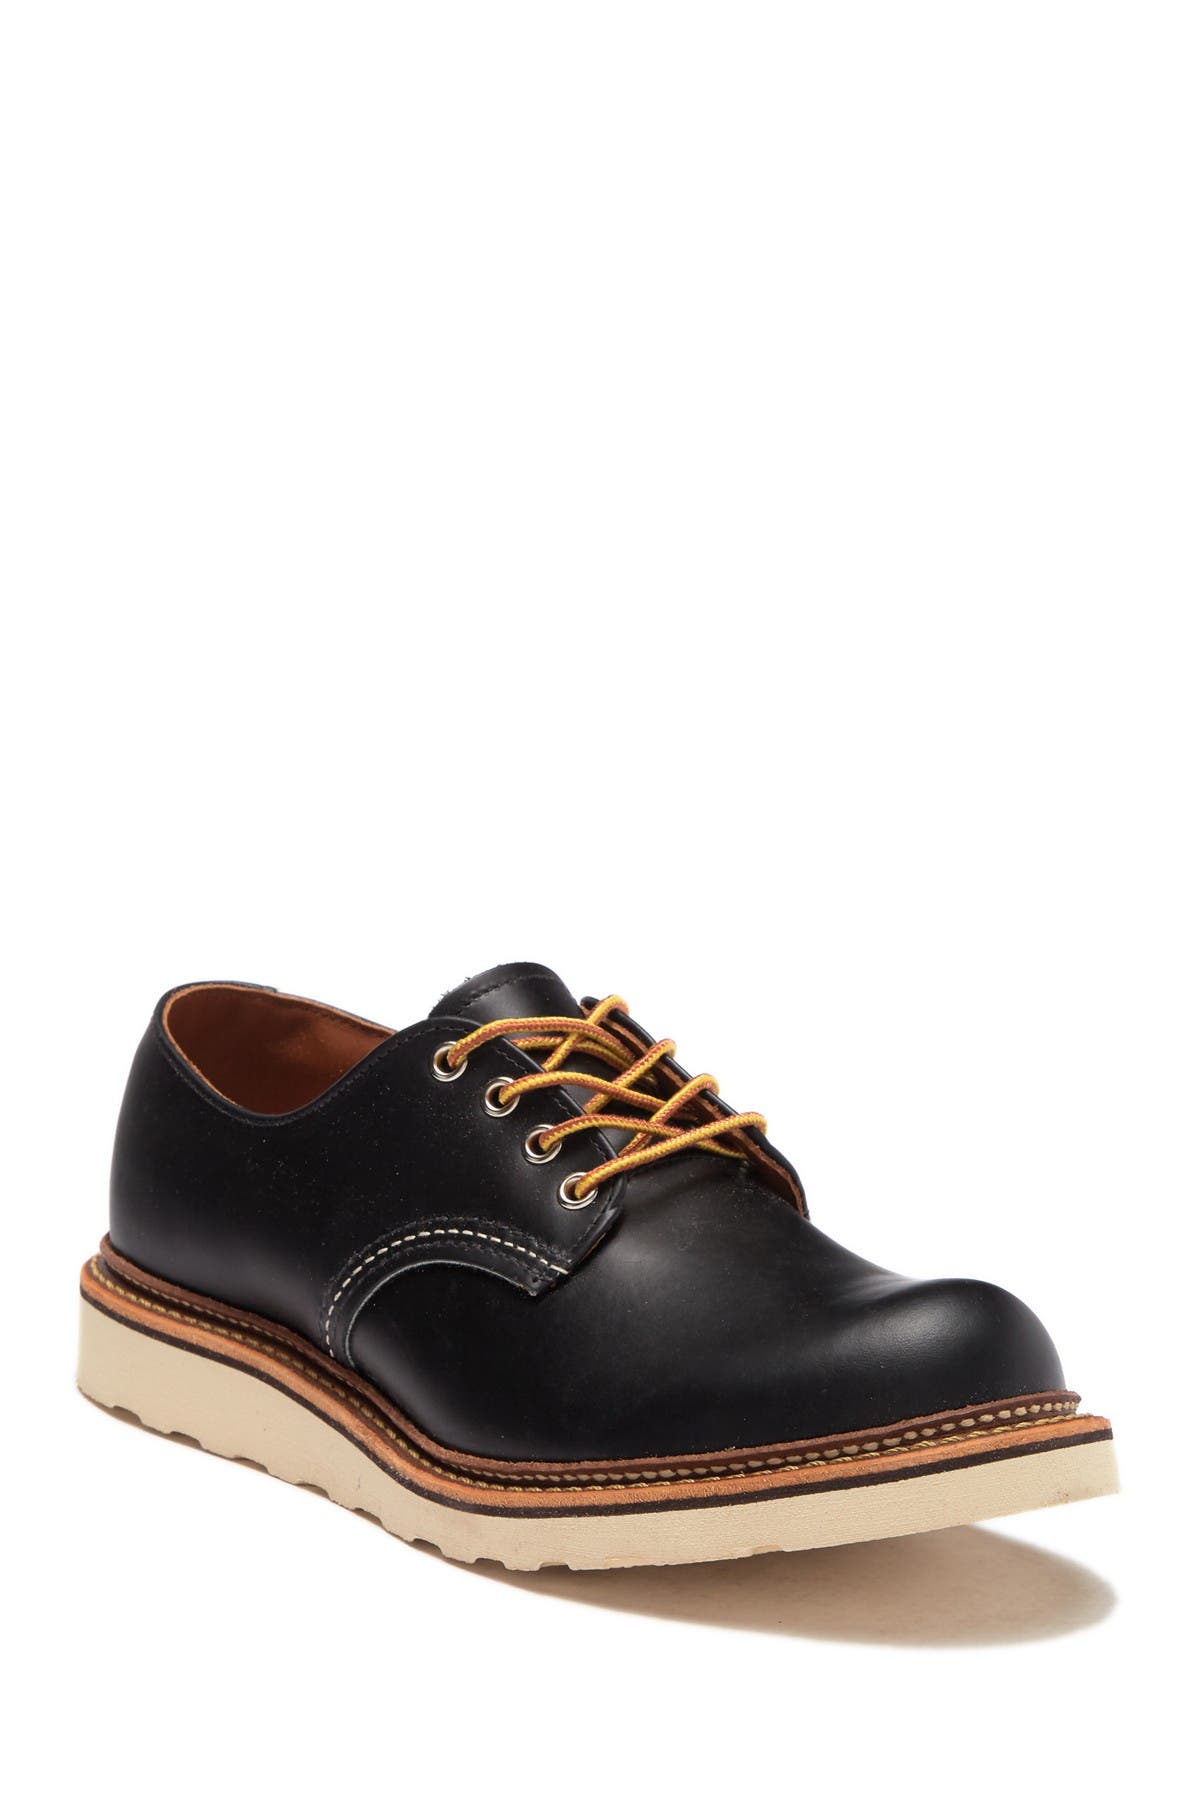 RED WING | Work Oxford - Factory Second 